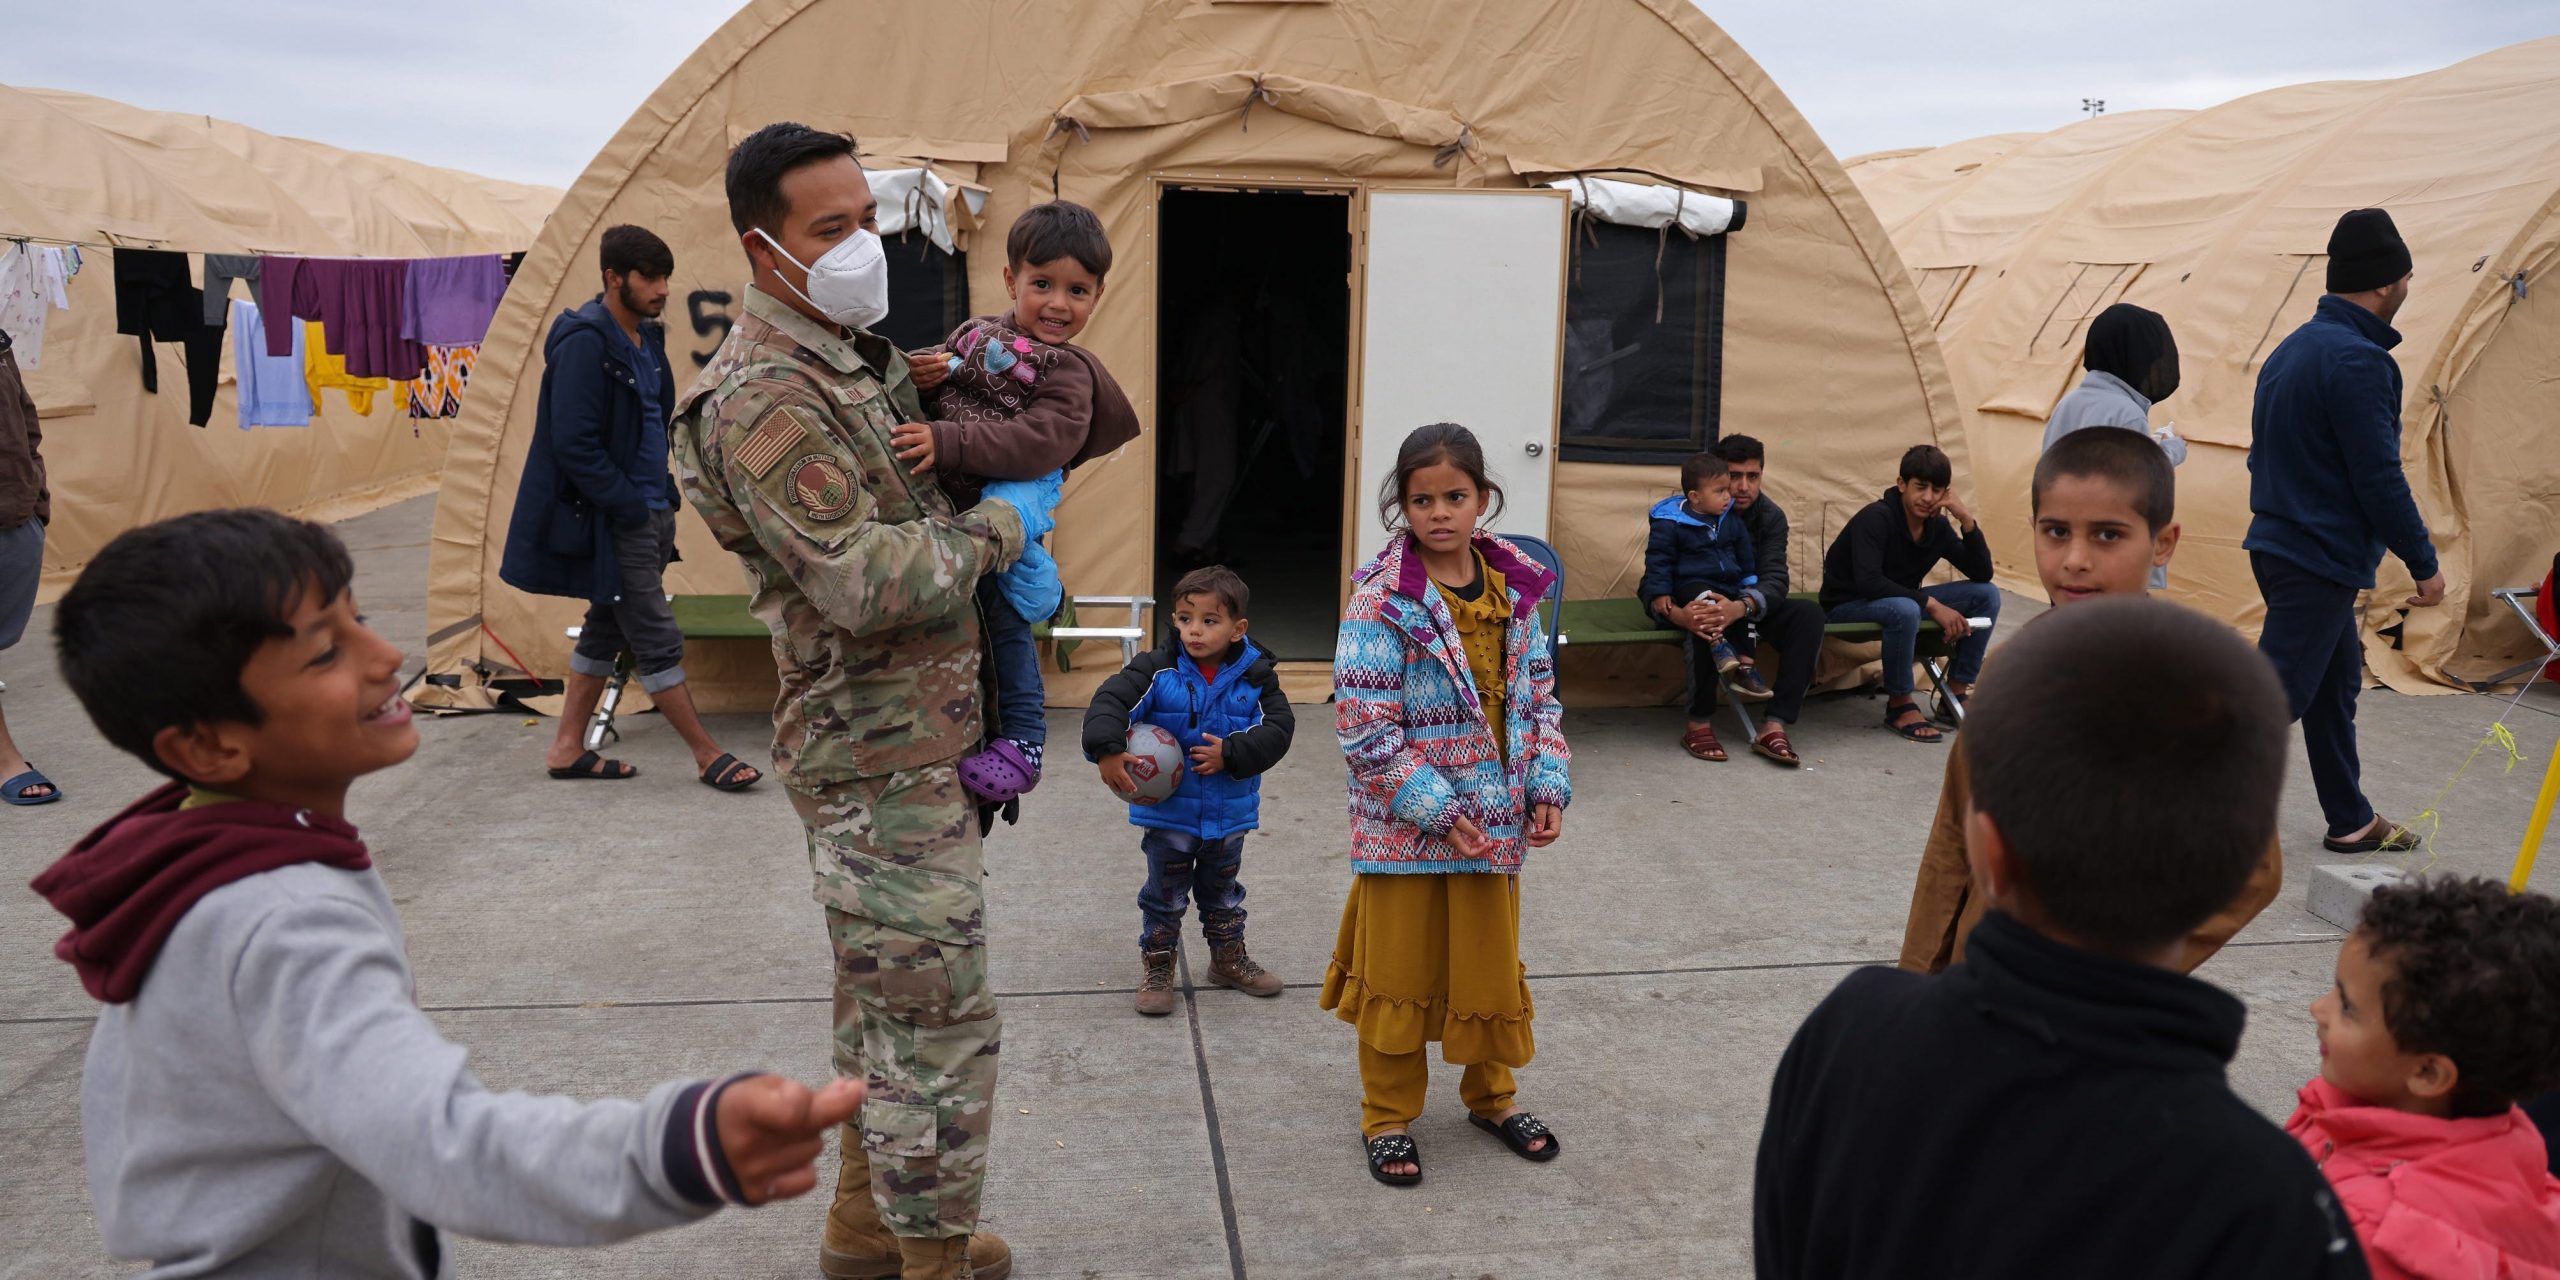 US soldier holds an Afghan child in front of refugee tents.